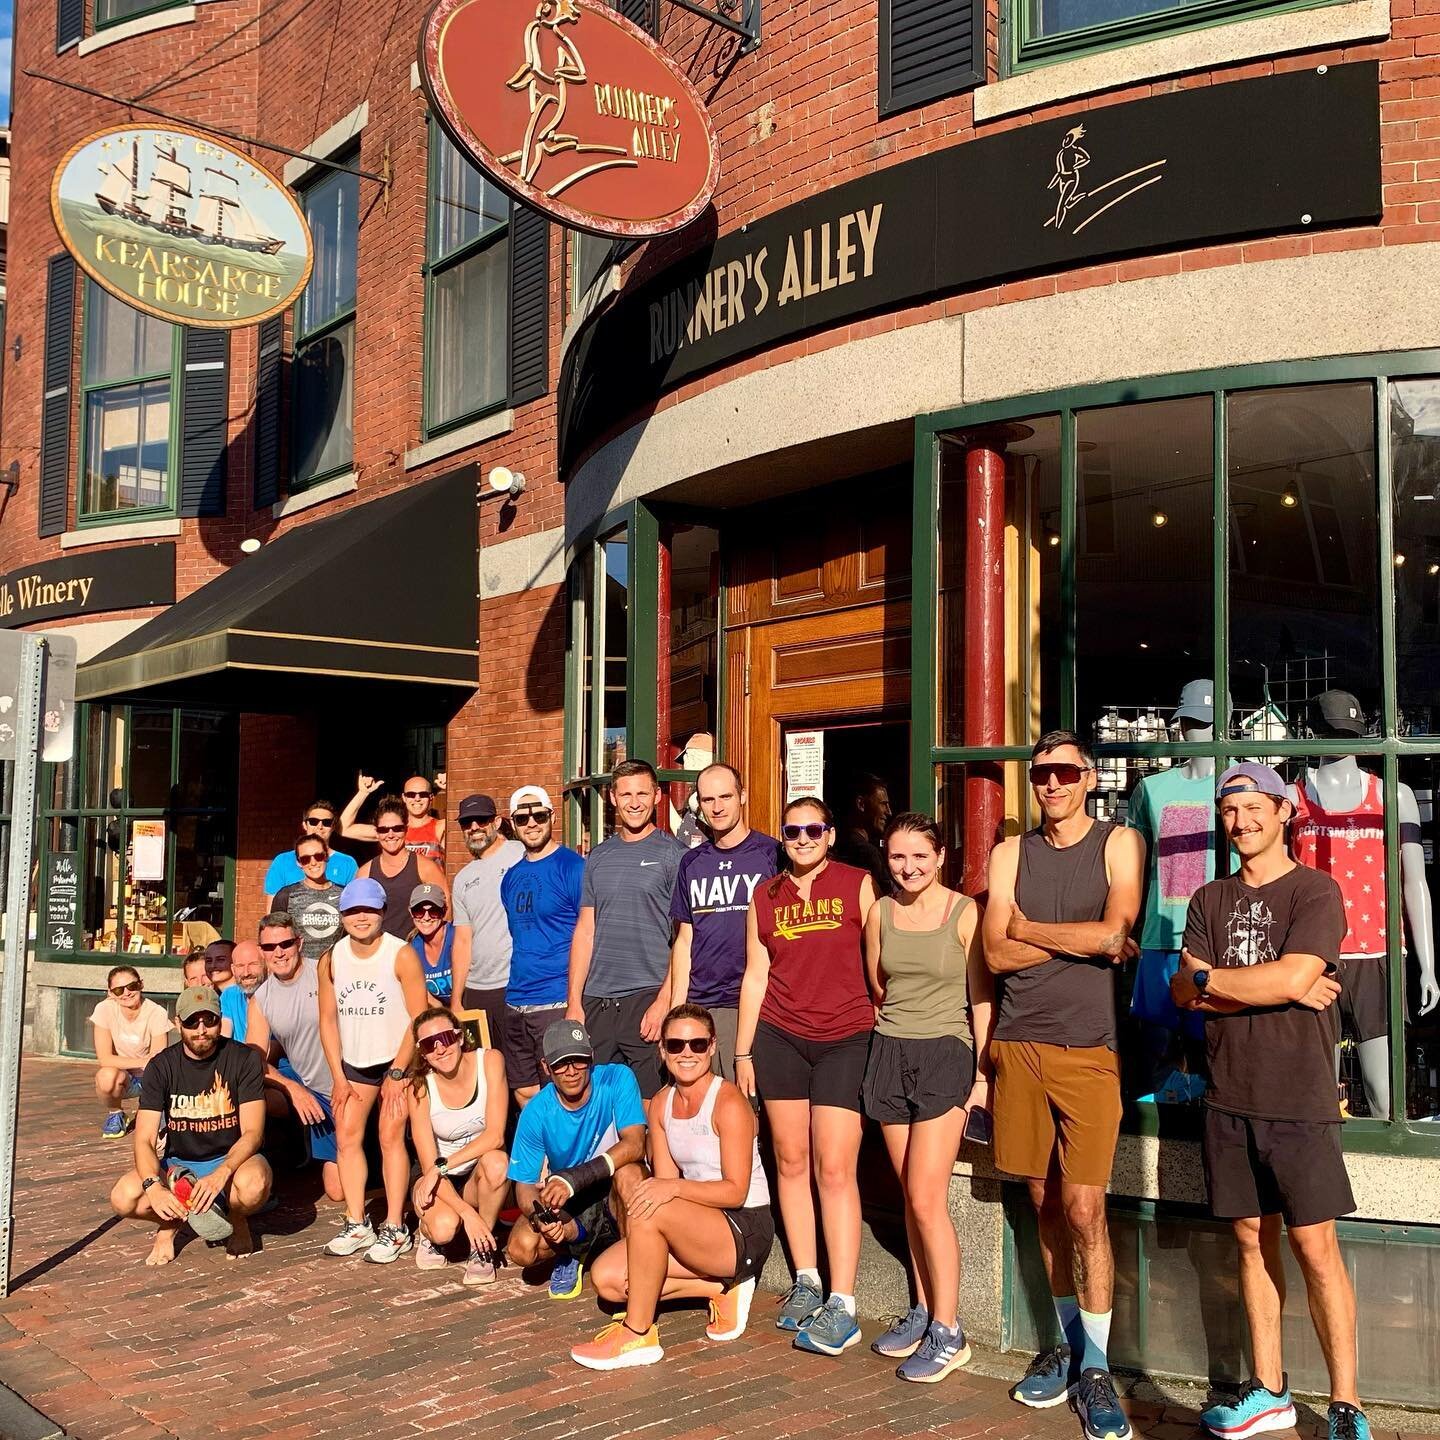 😃 Come run with friends tonight!

🏃🏻&zwj;♀️🏃🏾&zwj;♂️ Join us at 6PM at Runner&rsquo;s Alley for 3 or 5 miles - all paces and levels welcome! 

🐐 Stick around after your run for good drinks and food at The Goat! 

👀 Looking ahead to next week: 